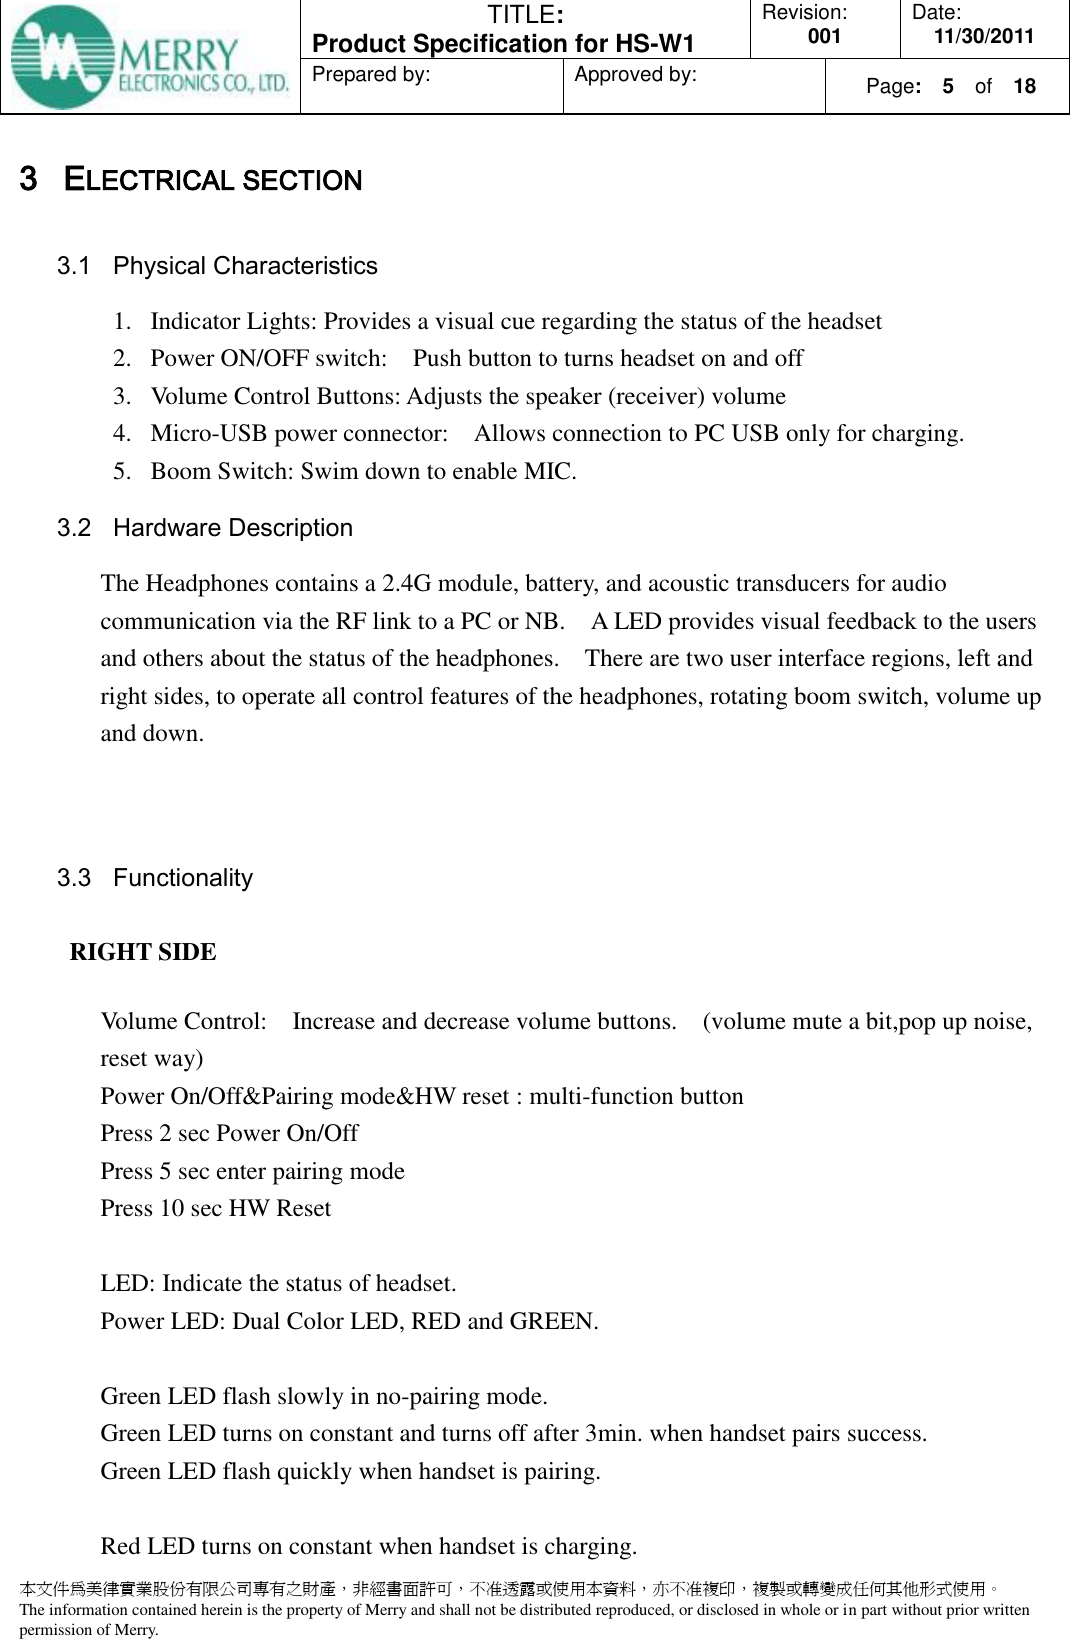  TITLE:  Product Specification for HS-W1 Revision: 001 Date: 11/30/2011 Prepared by:  Approved by:    Page:  5  of    18  本文件為美律實業股份有限公司專有之財產，非經書面許可，不准透露或使用本資料，亦不准複印，複製或轉變成任何其他形式使用。 The information contained herein is the property of Merry and shall not be distributed reproduced, or disclosed in whole or in part without prior written permission of Merry.  3 ELECTRICAL SECTION 3.1 Physical Characteristics 1. Indicator Lights: Provides a visual cue regarding the status of the headset 2. Power ON/OFF switch:    Push button to turns headset on and off 3. Volume Control Buttons: Adjusts the speaker (receiver) volume 4. Micro-USB power connector:    Allows connection to PC USB only for charging. 5. Boom Switch: Swim down to enable MIC. 3.2 Hardware Description The Headphones contains a 2.4G module, battery, and acoustic transducers for audio communication via the RF link to a PC or NB.    A LED provides visual feedback to the users and others about the status of the headphones.    There are two user interface regions, left and right sides, to operate all control features of the headphones, rotating boom switch, volume up and down.    3.3 Functionality RIGHT SIDE Volume Control:    Increase and decrease volume buttons.    (volume mute a bit,pop up noise, reset way) Power On/Off&amp;Pairing mode&amp;HW reset : multi-function button Press 2 sec Power On/Off Press 5 sec enter pairing mode Press 10 sec HW Reset  LED: Indicate the status of headset. Power LED: Dual Color LED, RED and GREEN.    Green LED flash slowly in no-pairing mode. Green LED turns on constant and turns off after 3min. when handset pairs success. Green LED flash quickly when handset is pairing.  Red LED turns on constant when handset is charging.   